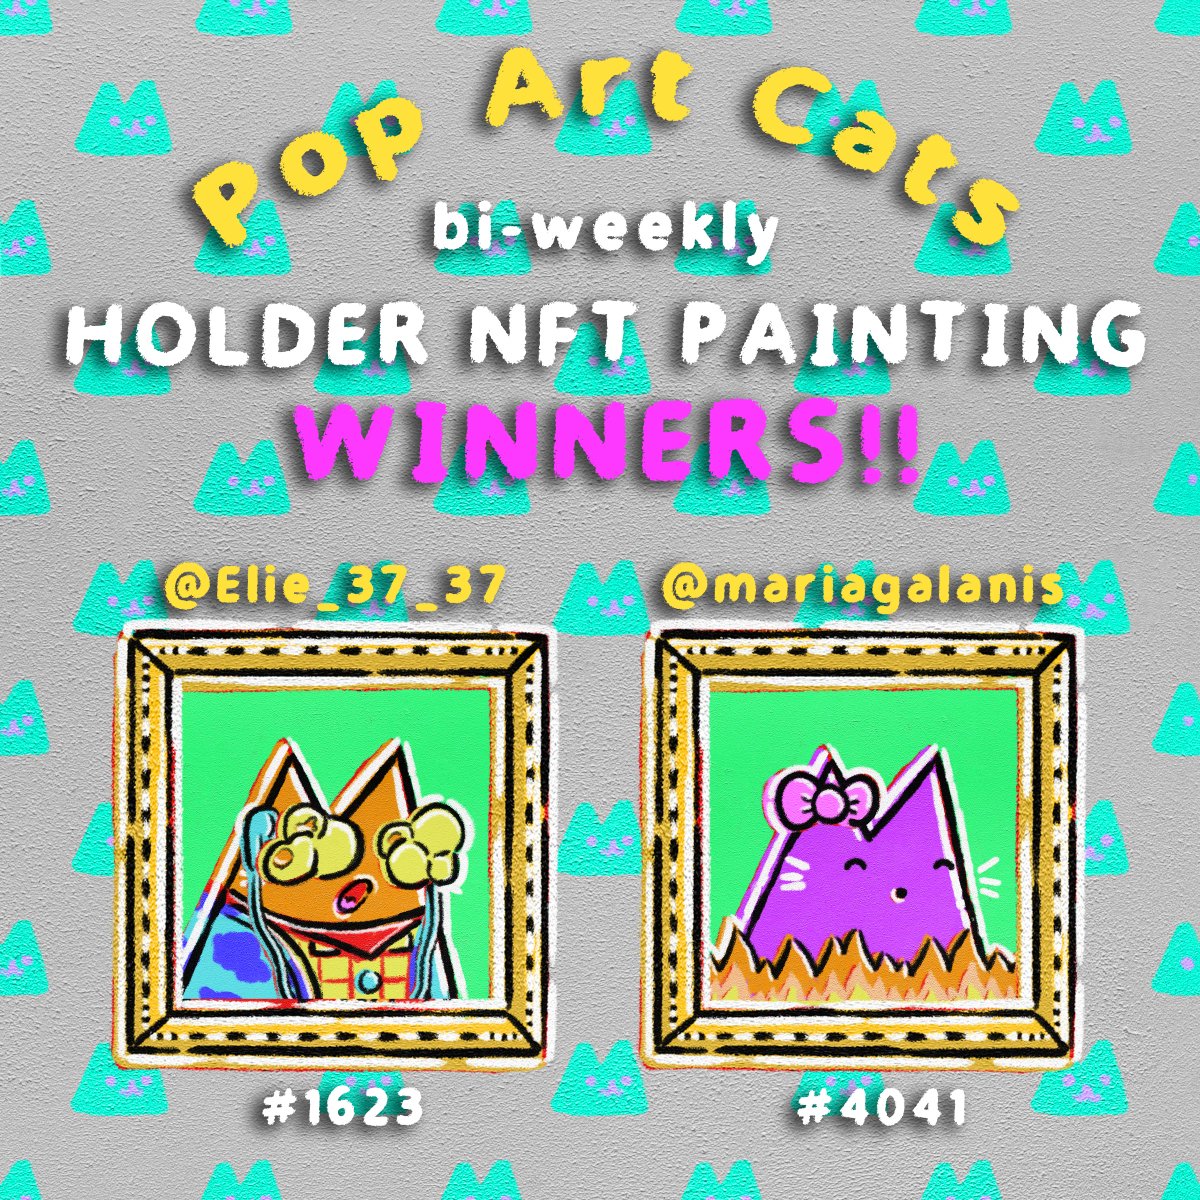 Congrats to the winners of this weeks #PopArtCats bi weekly Physical Art #Giveaway!! 

🎉@Elie_37_37 #1623 & @mariagalanis #4041 

Join us today at 6pm est to watch @mattchessco paint these #PACs!! 

Tune in: 
Youtube: youtube.com/c/MattChessco
TikTok: tiktok.com/@mattchessco